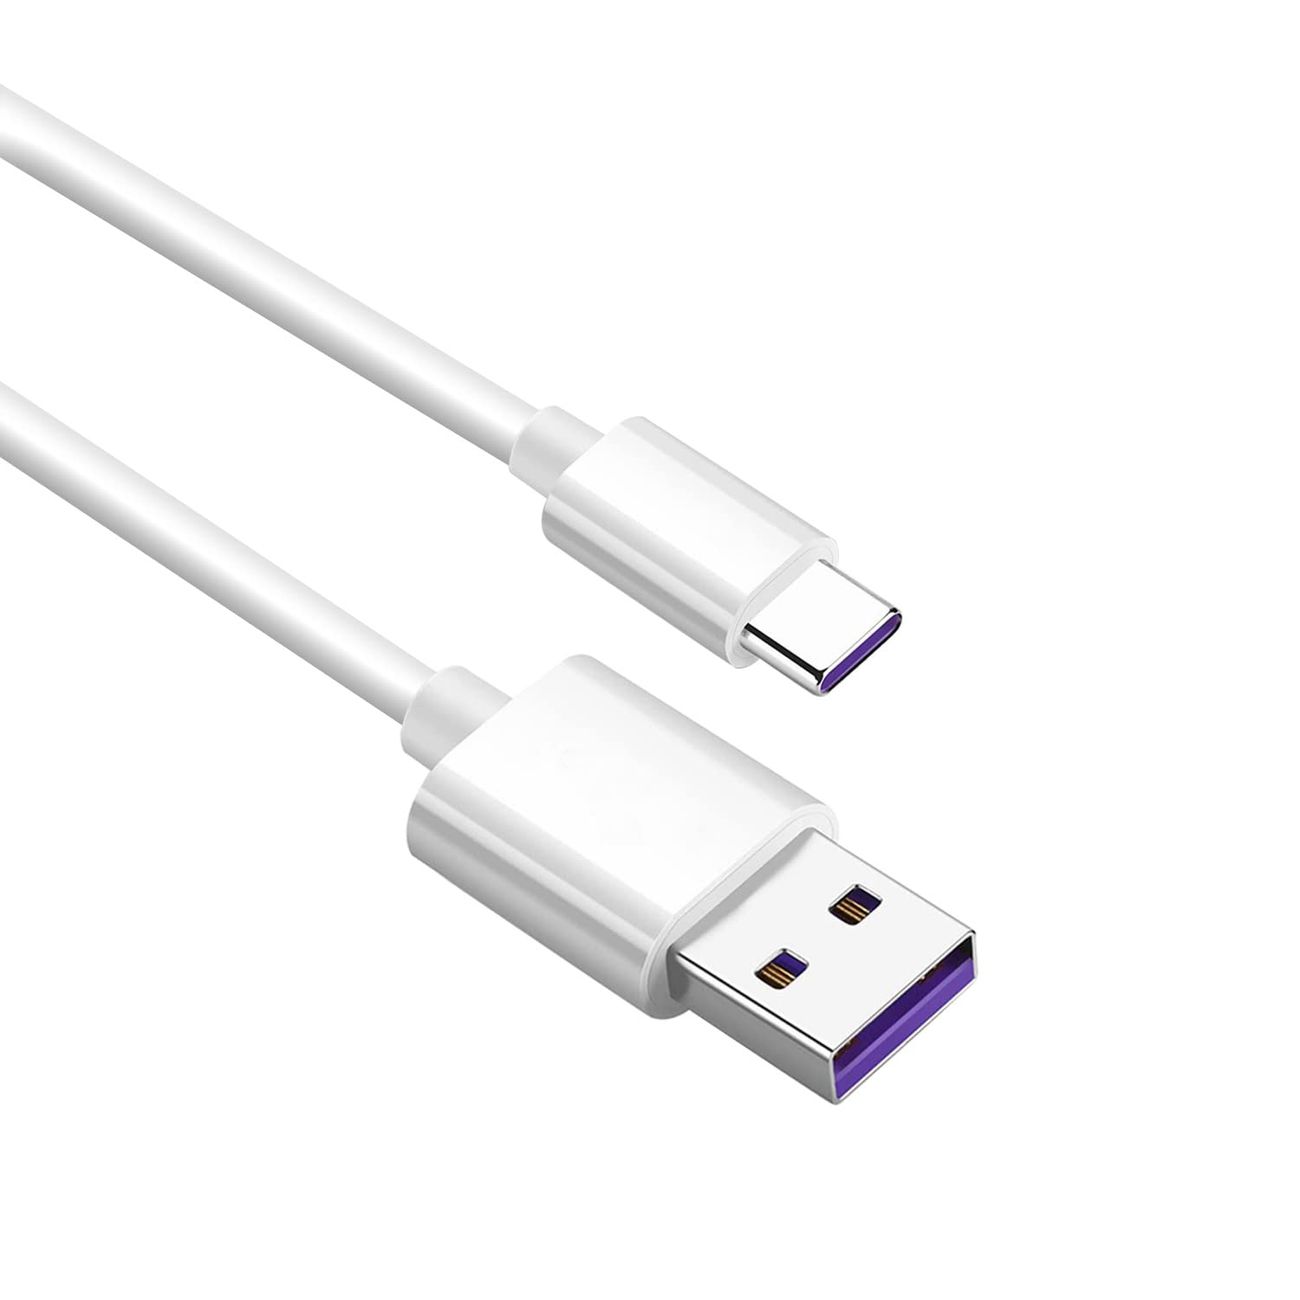 CABLE TYPE C XIAOMI COPY 1 USB DATA & CHARGE FOR SMARTPHONE 5.0A ,Other Smartphone Acc